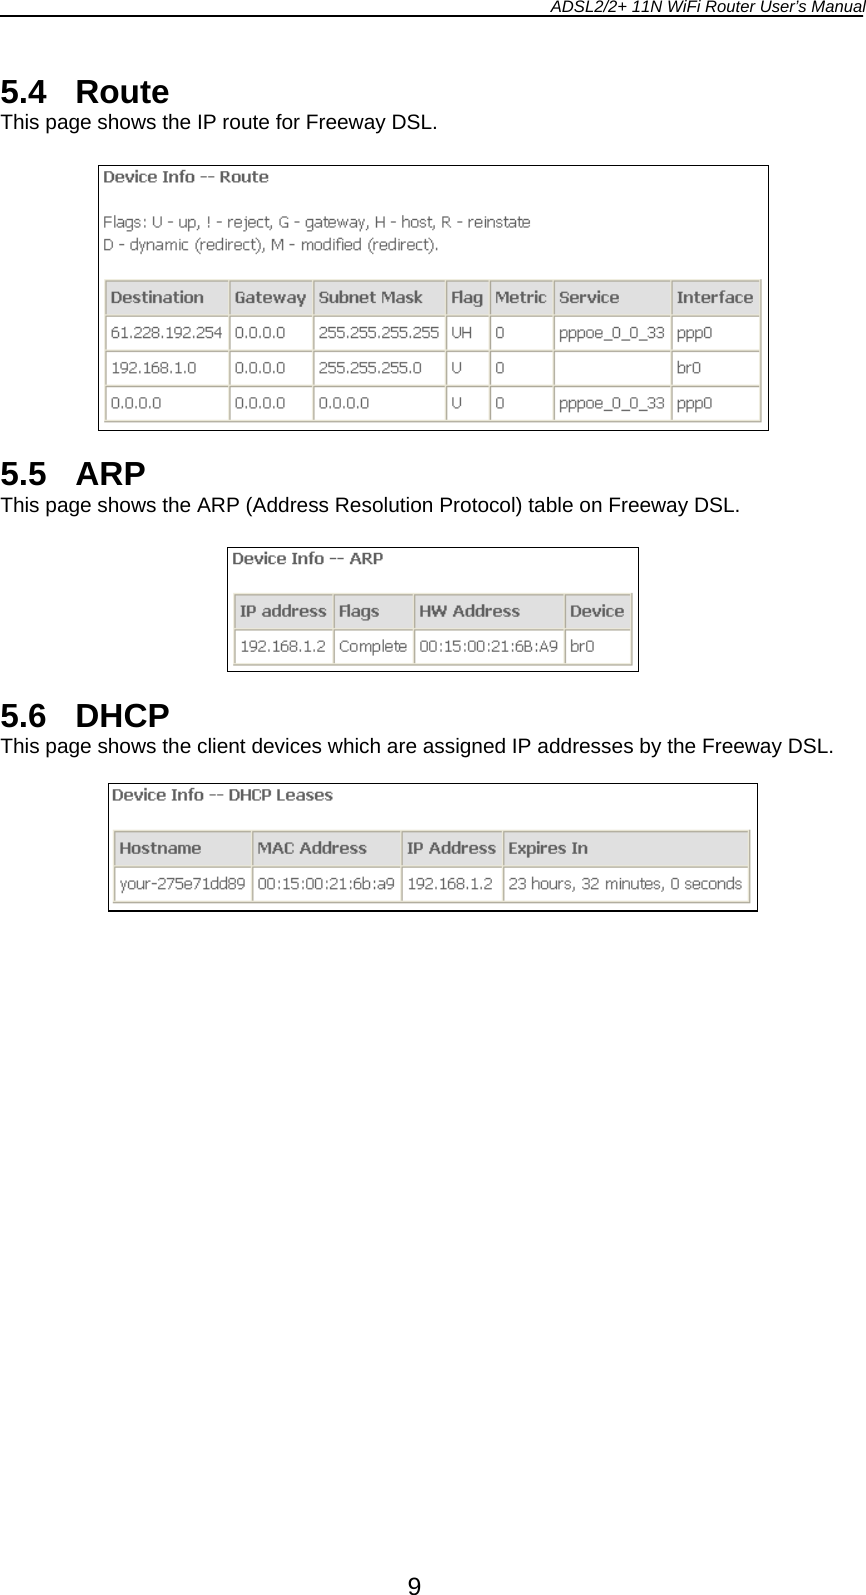 ADSL2/2+ 11N WiFi Router User’s Manual  9 5.4 Route This page shows the IP route for Freeway DSL.    5.5 ARP This page shows the ARP (Address Resolution Protocol) table on Freeway DSL.    5.6 DHCP This page shows the client devices which are assigned IP addresses by the Freeway DSL.    